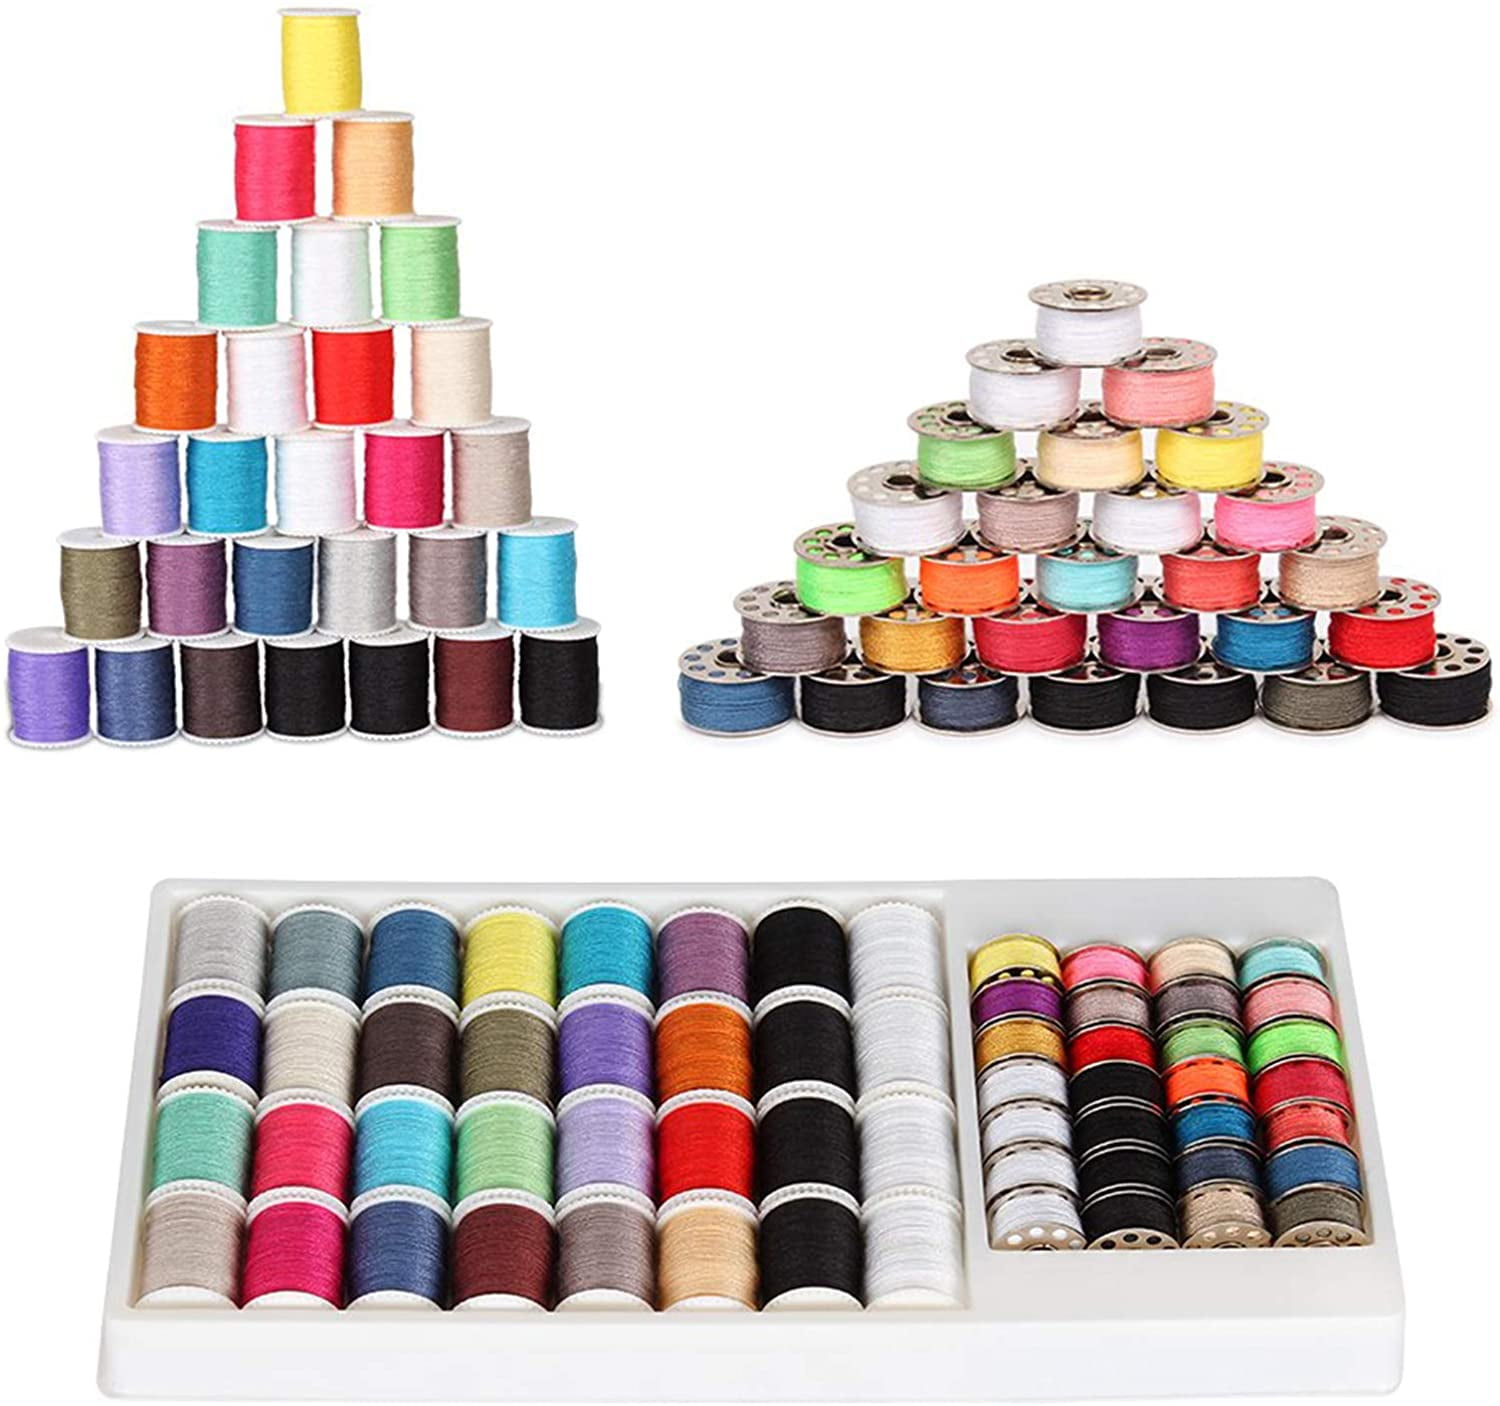 99pcs Sewing Kit for Beginners Sewing Thread Thailand